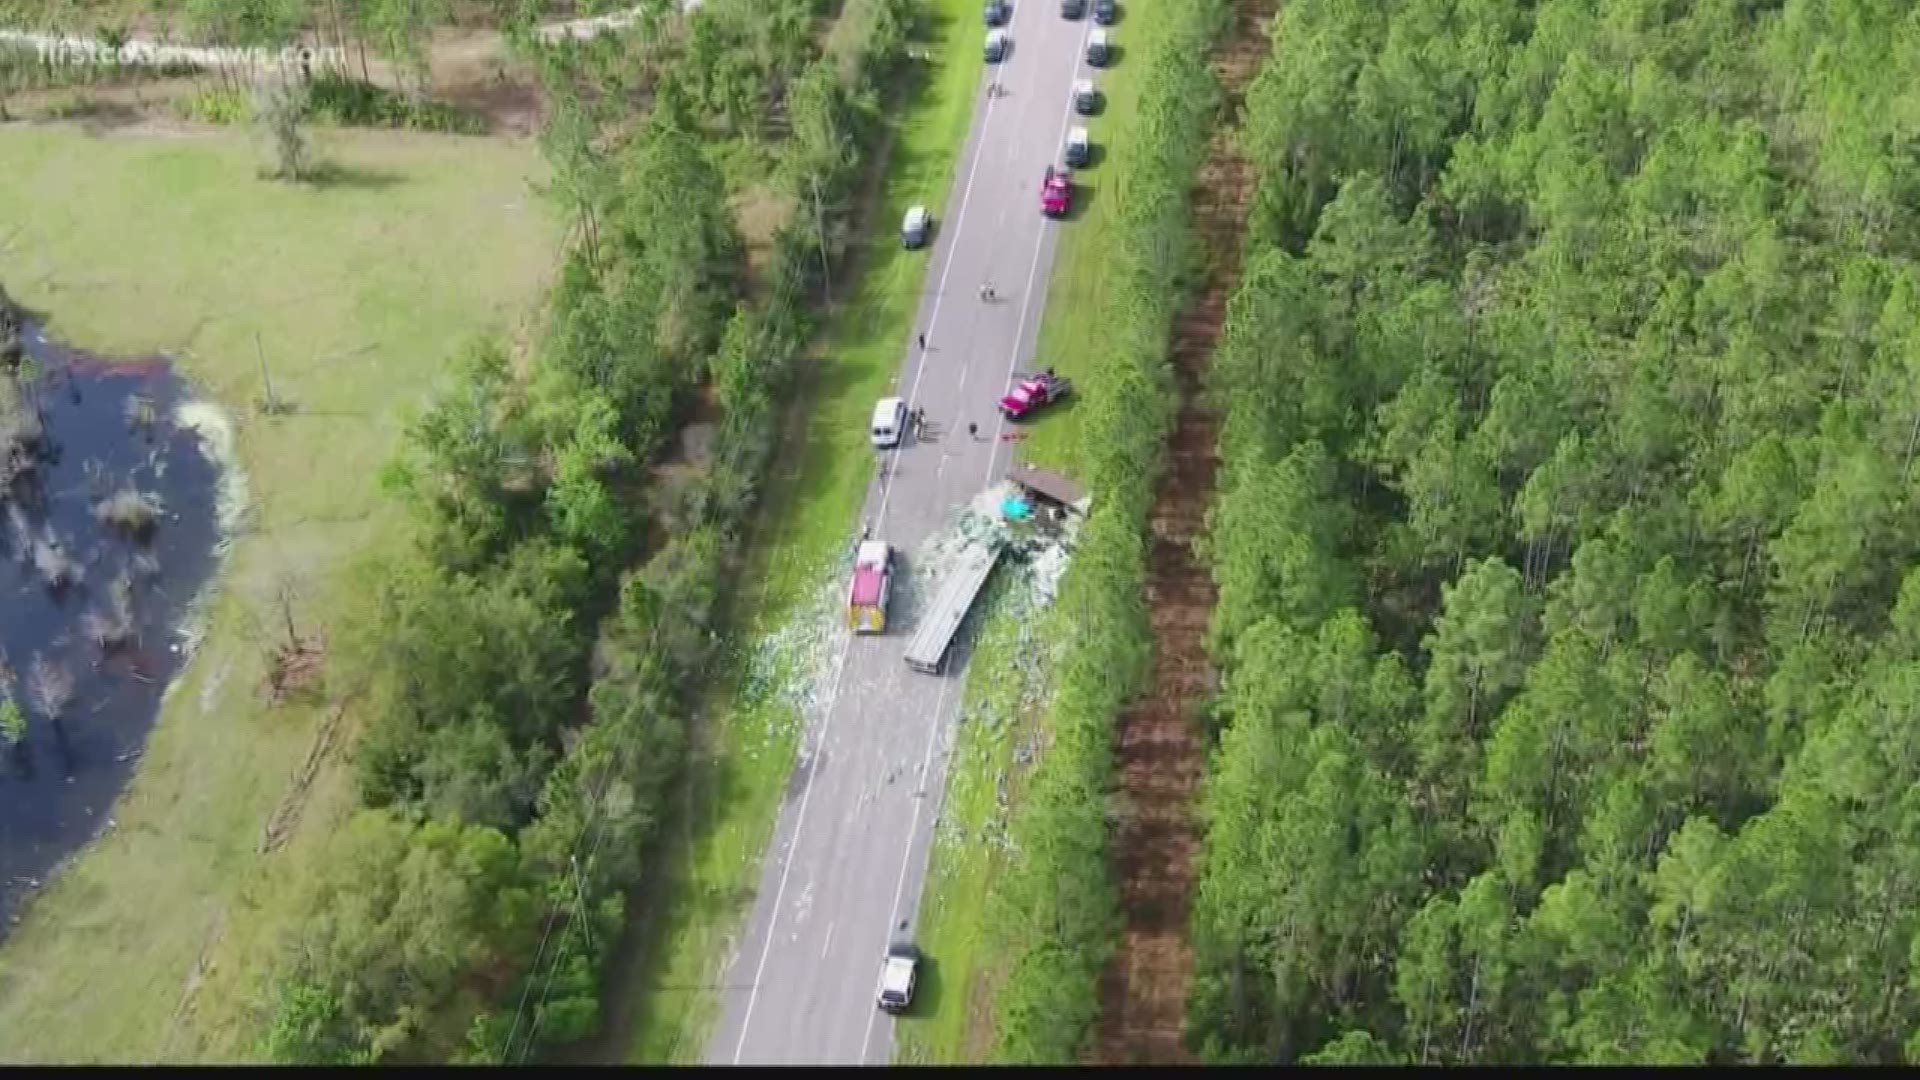 Two people are dead and one man was seriously injured in a crash involving a semi-truck in the San Mateo area of Putnam County on Wednesday afternoon, according to Florida Highway Patrol.